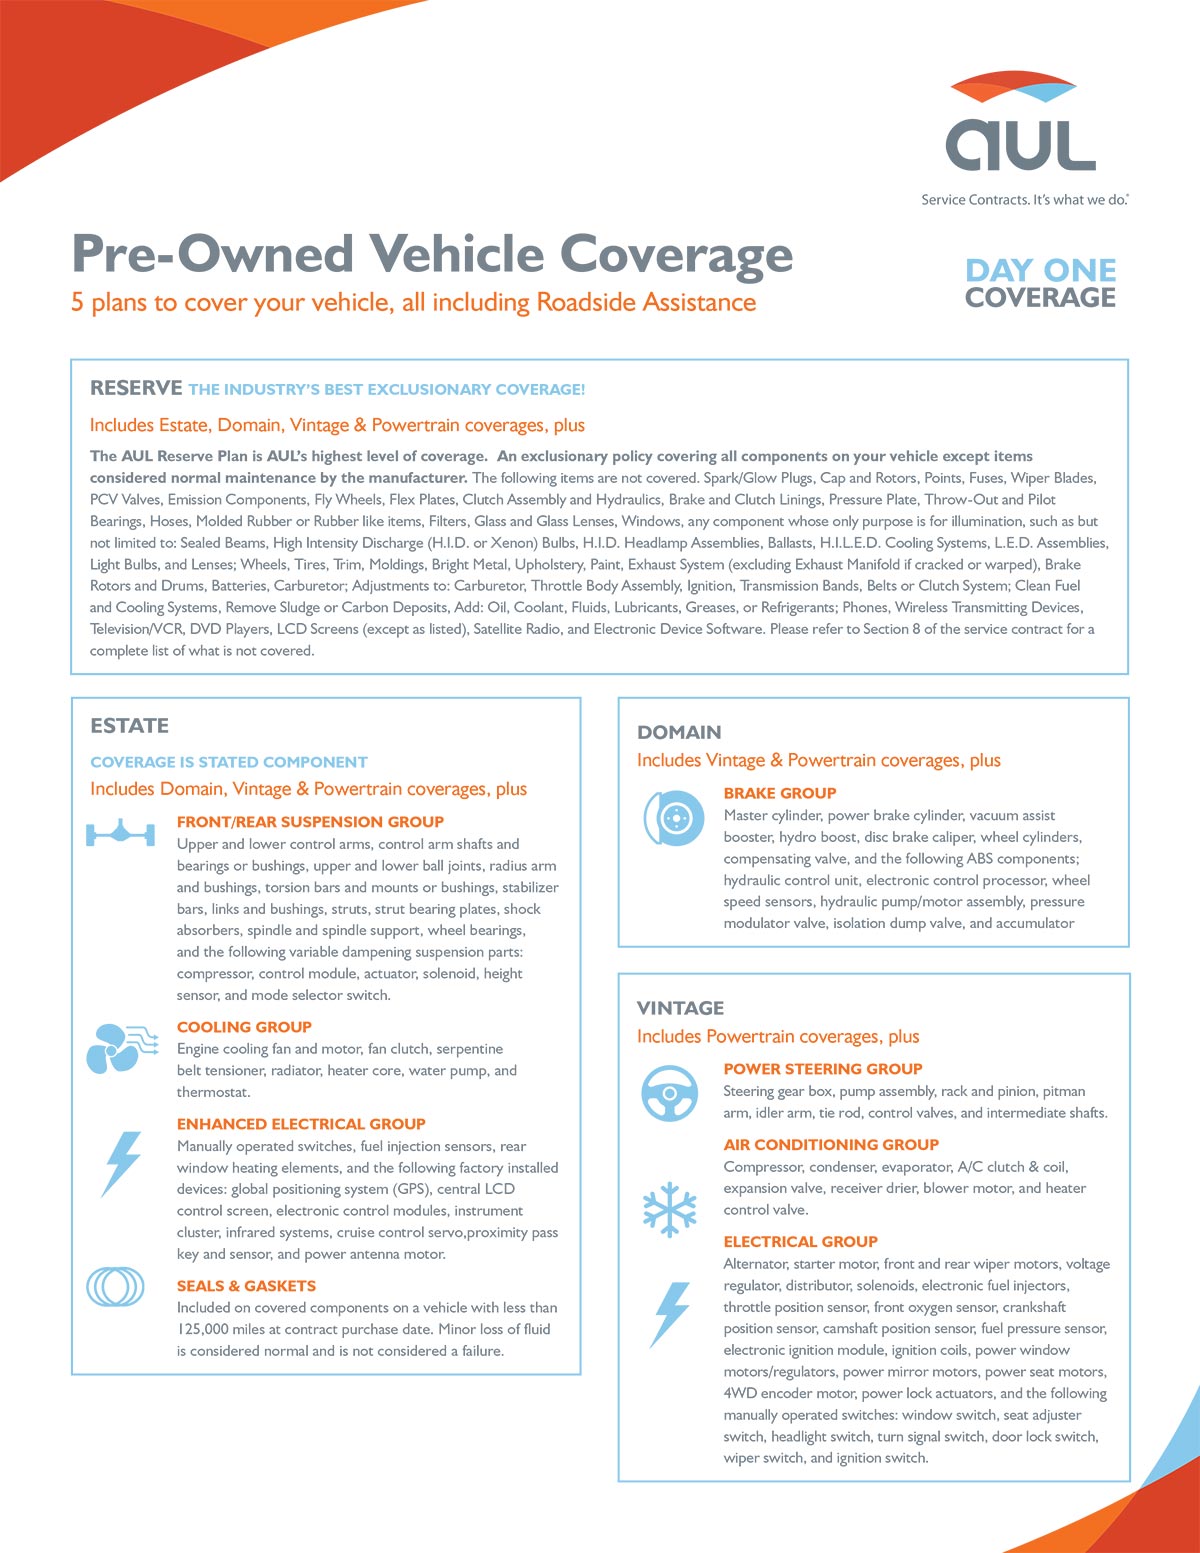 Pre-owned vehicle coverage